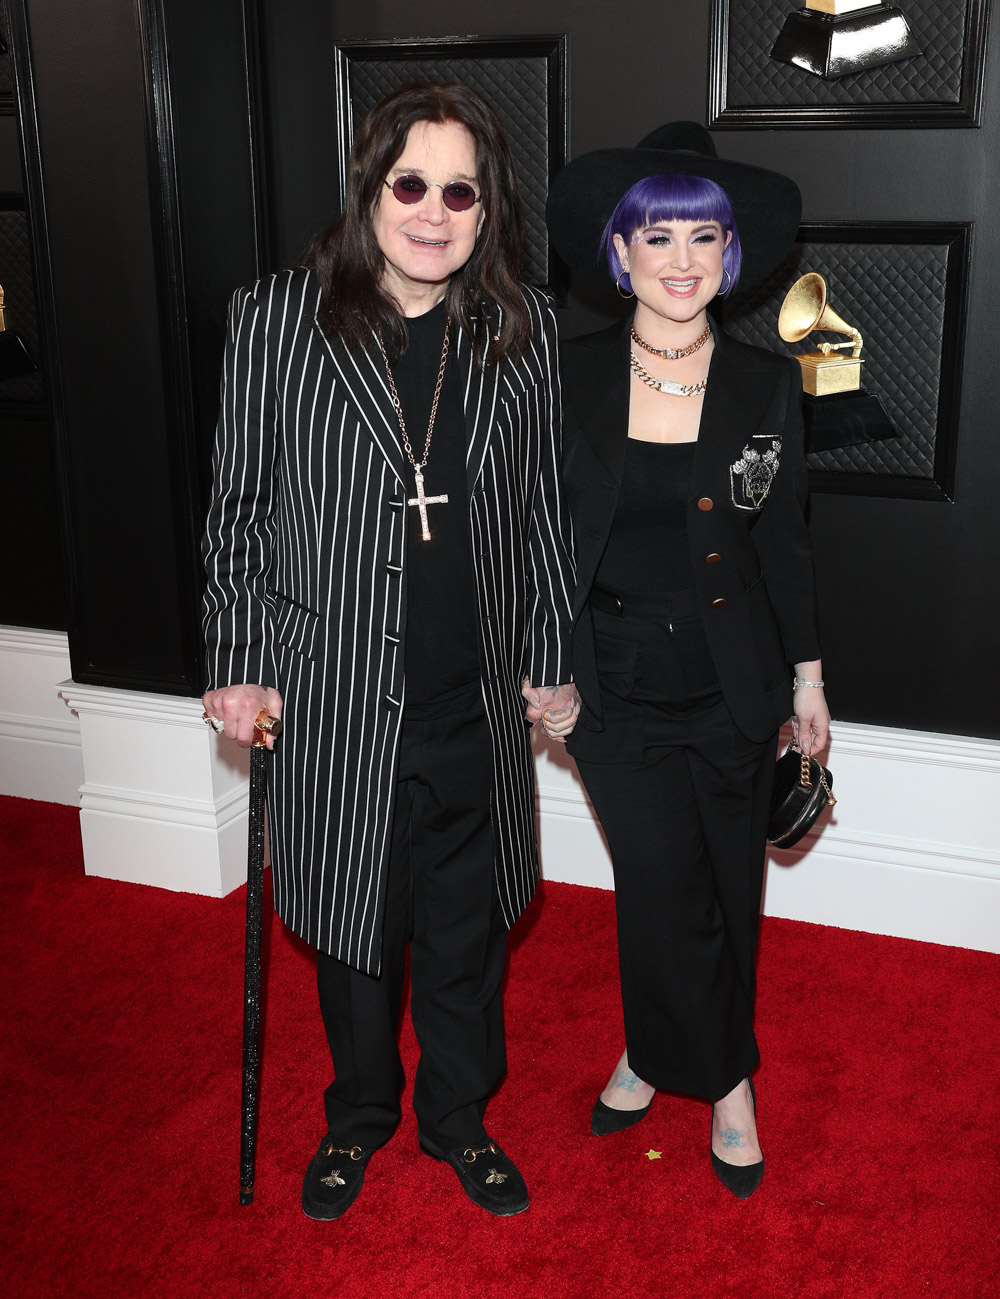 ozzy osbourne before and after